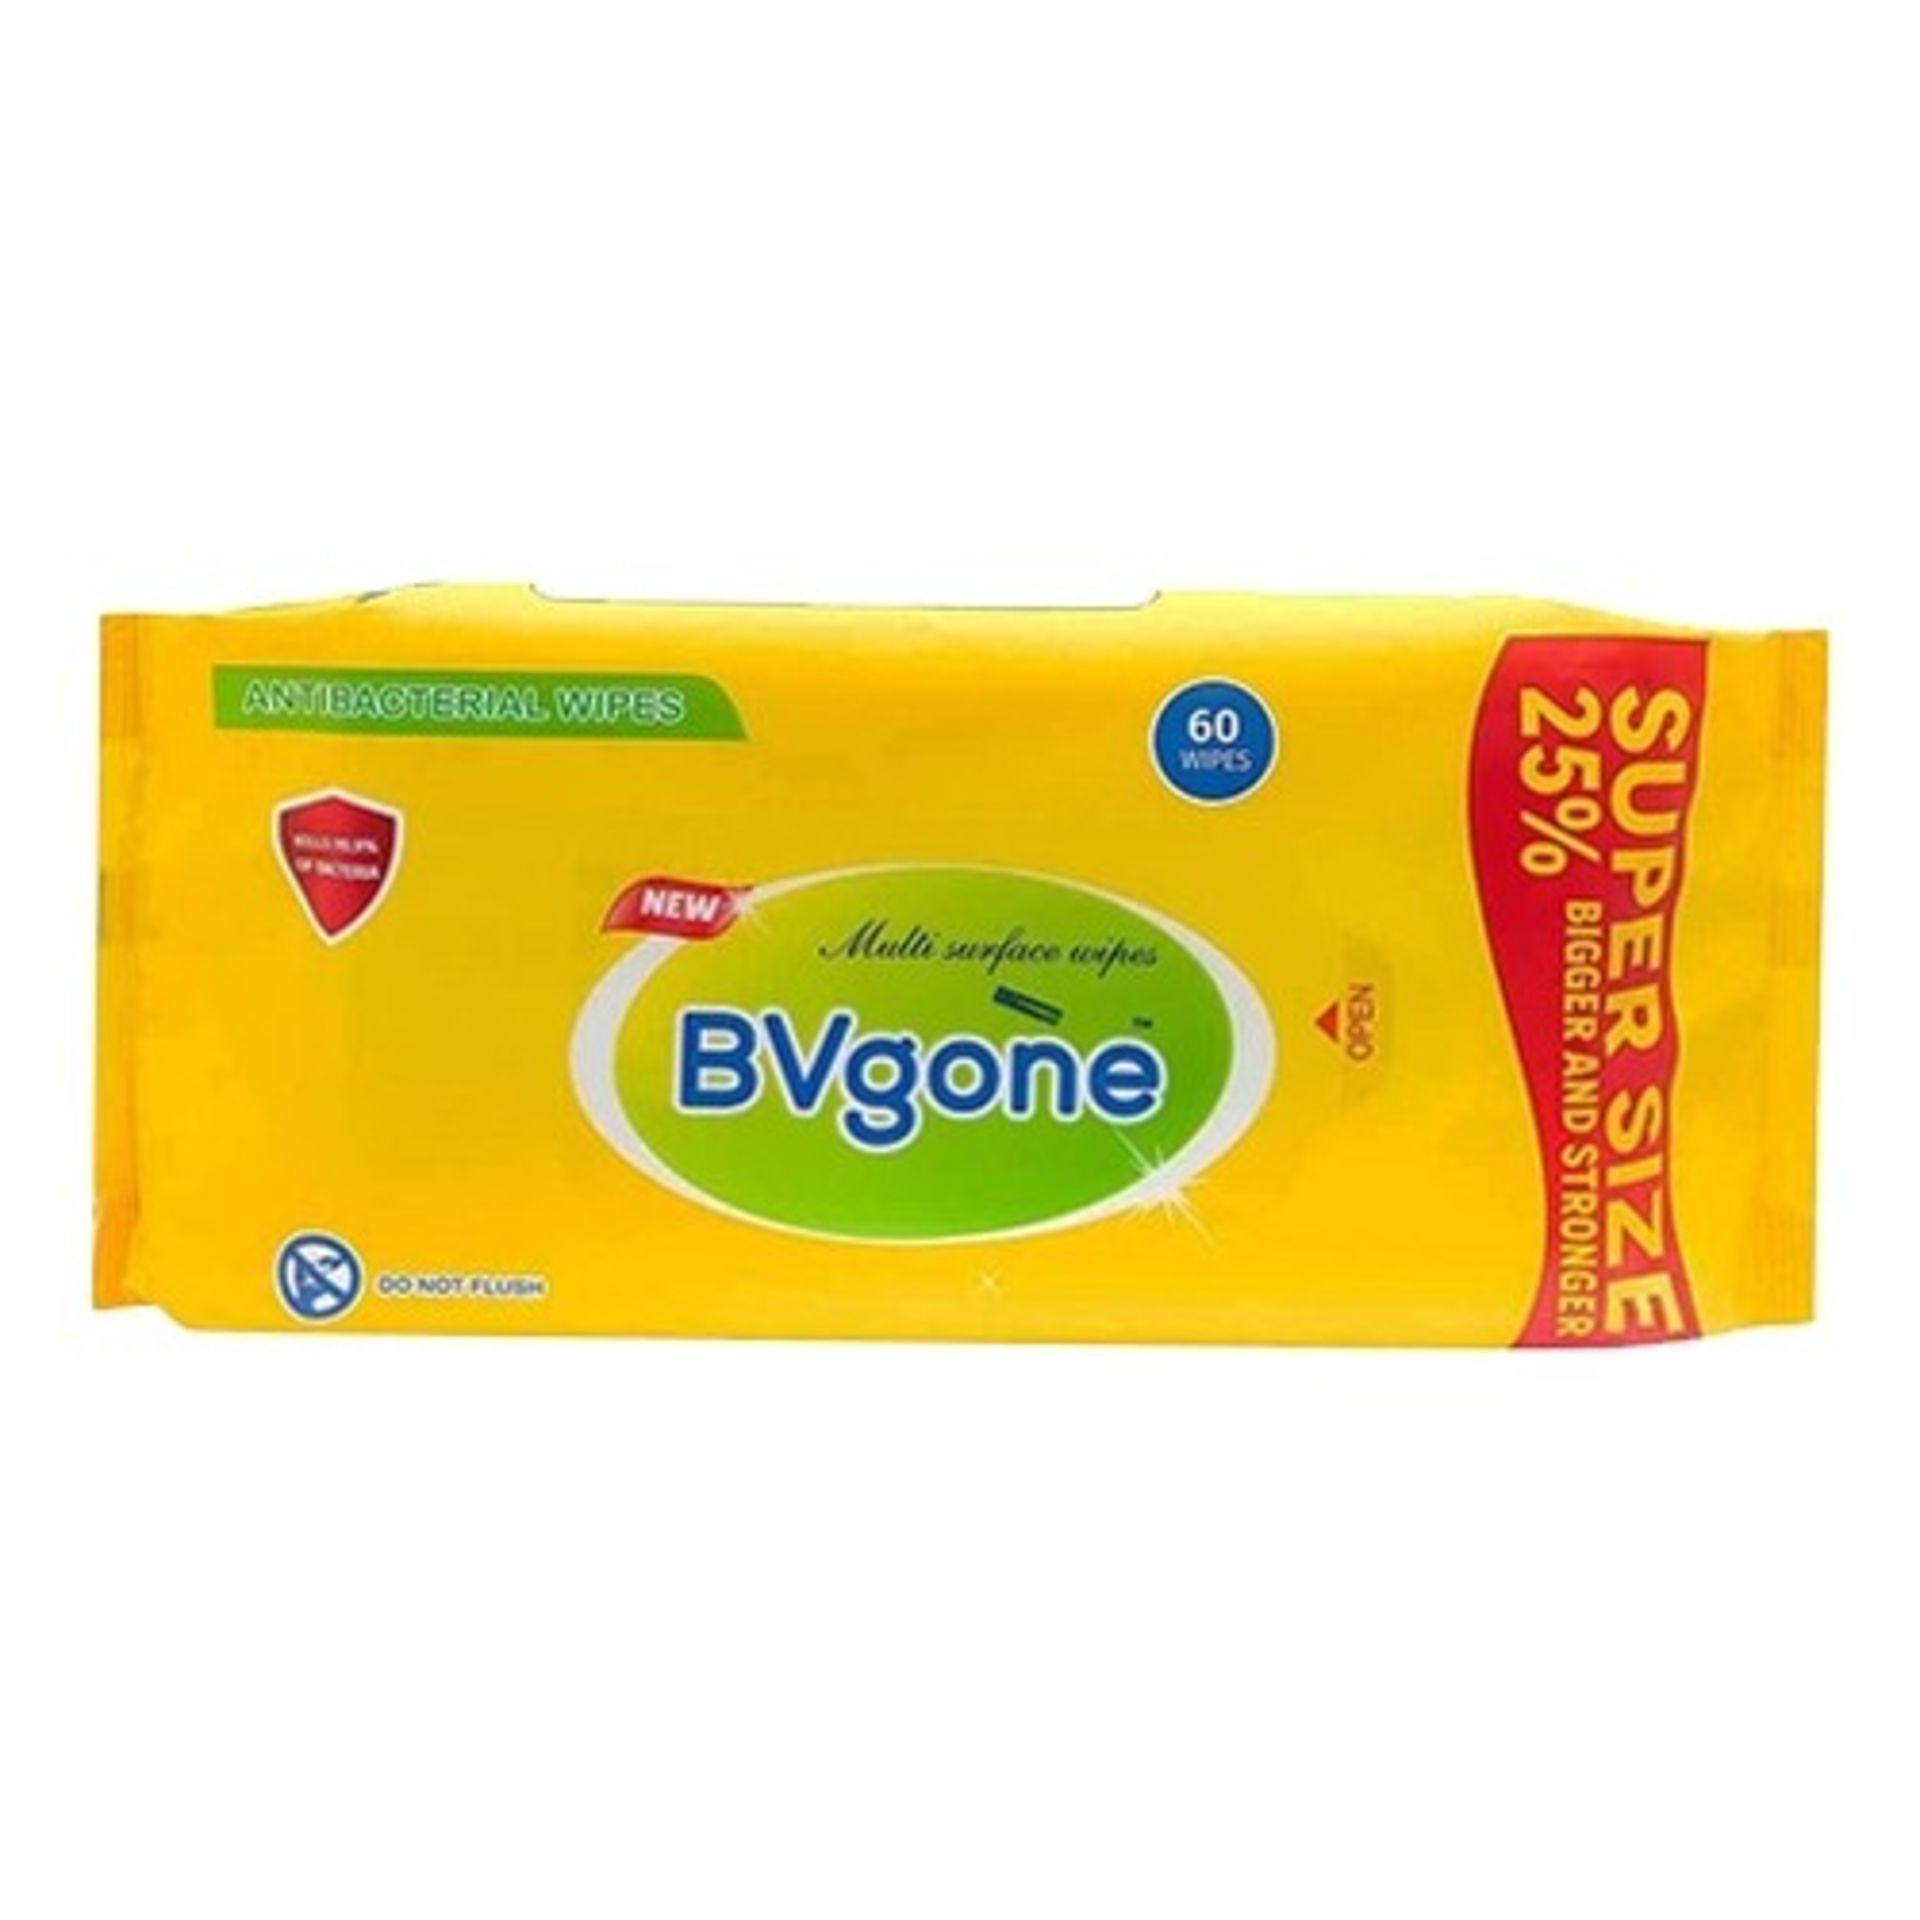 PALLET TO CONTAIN 1,440 x Packs of 60 wipes Bvgone Antibacterial Wipes – Get these new BVgone Non-